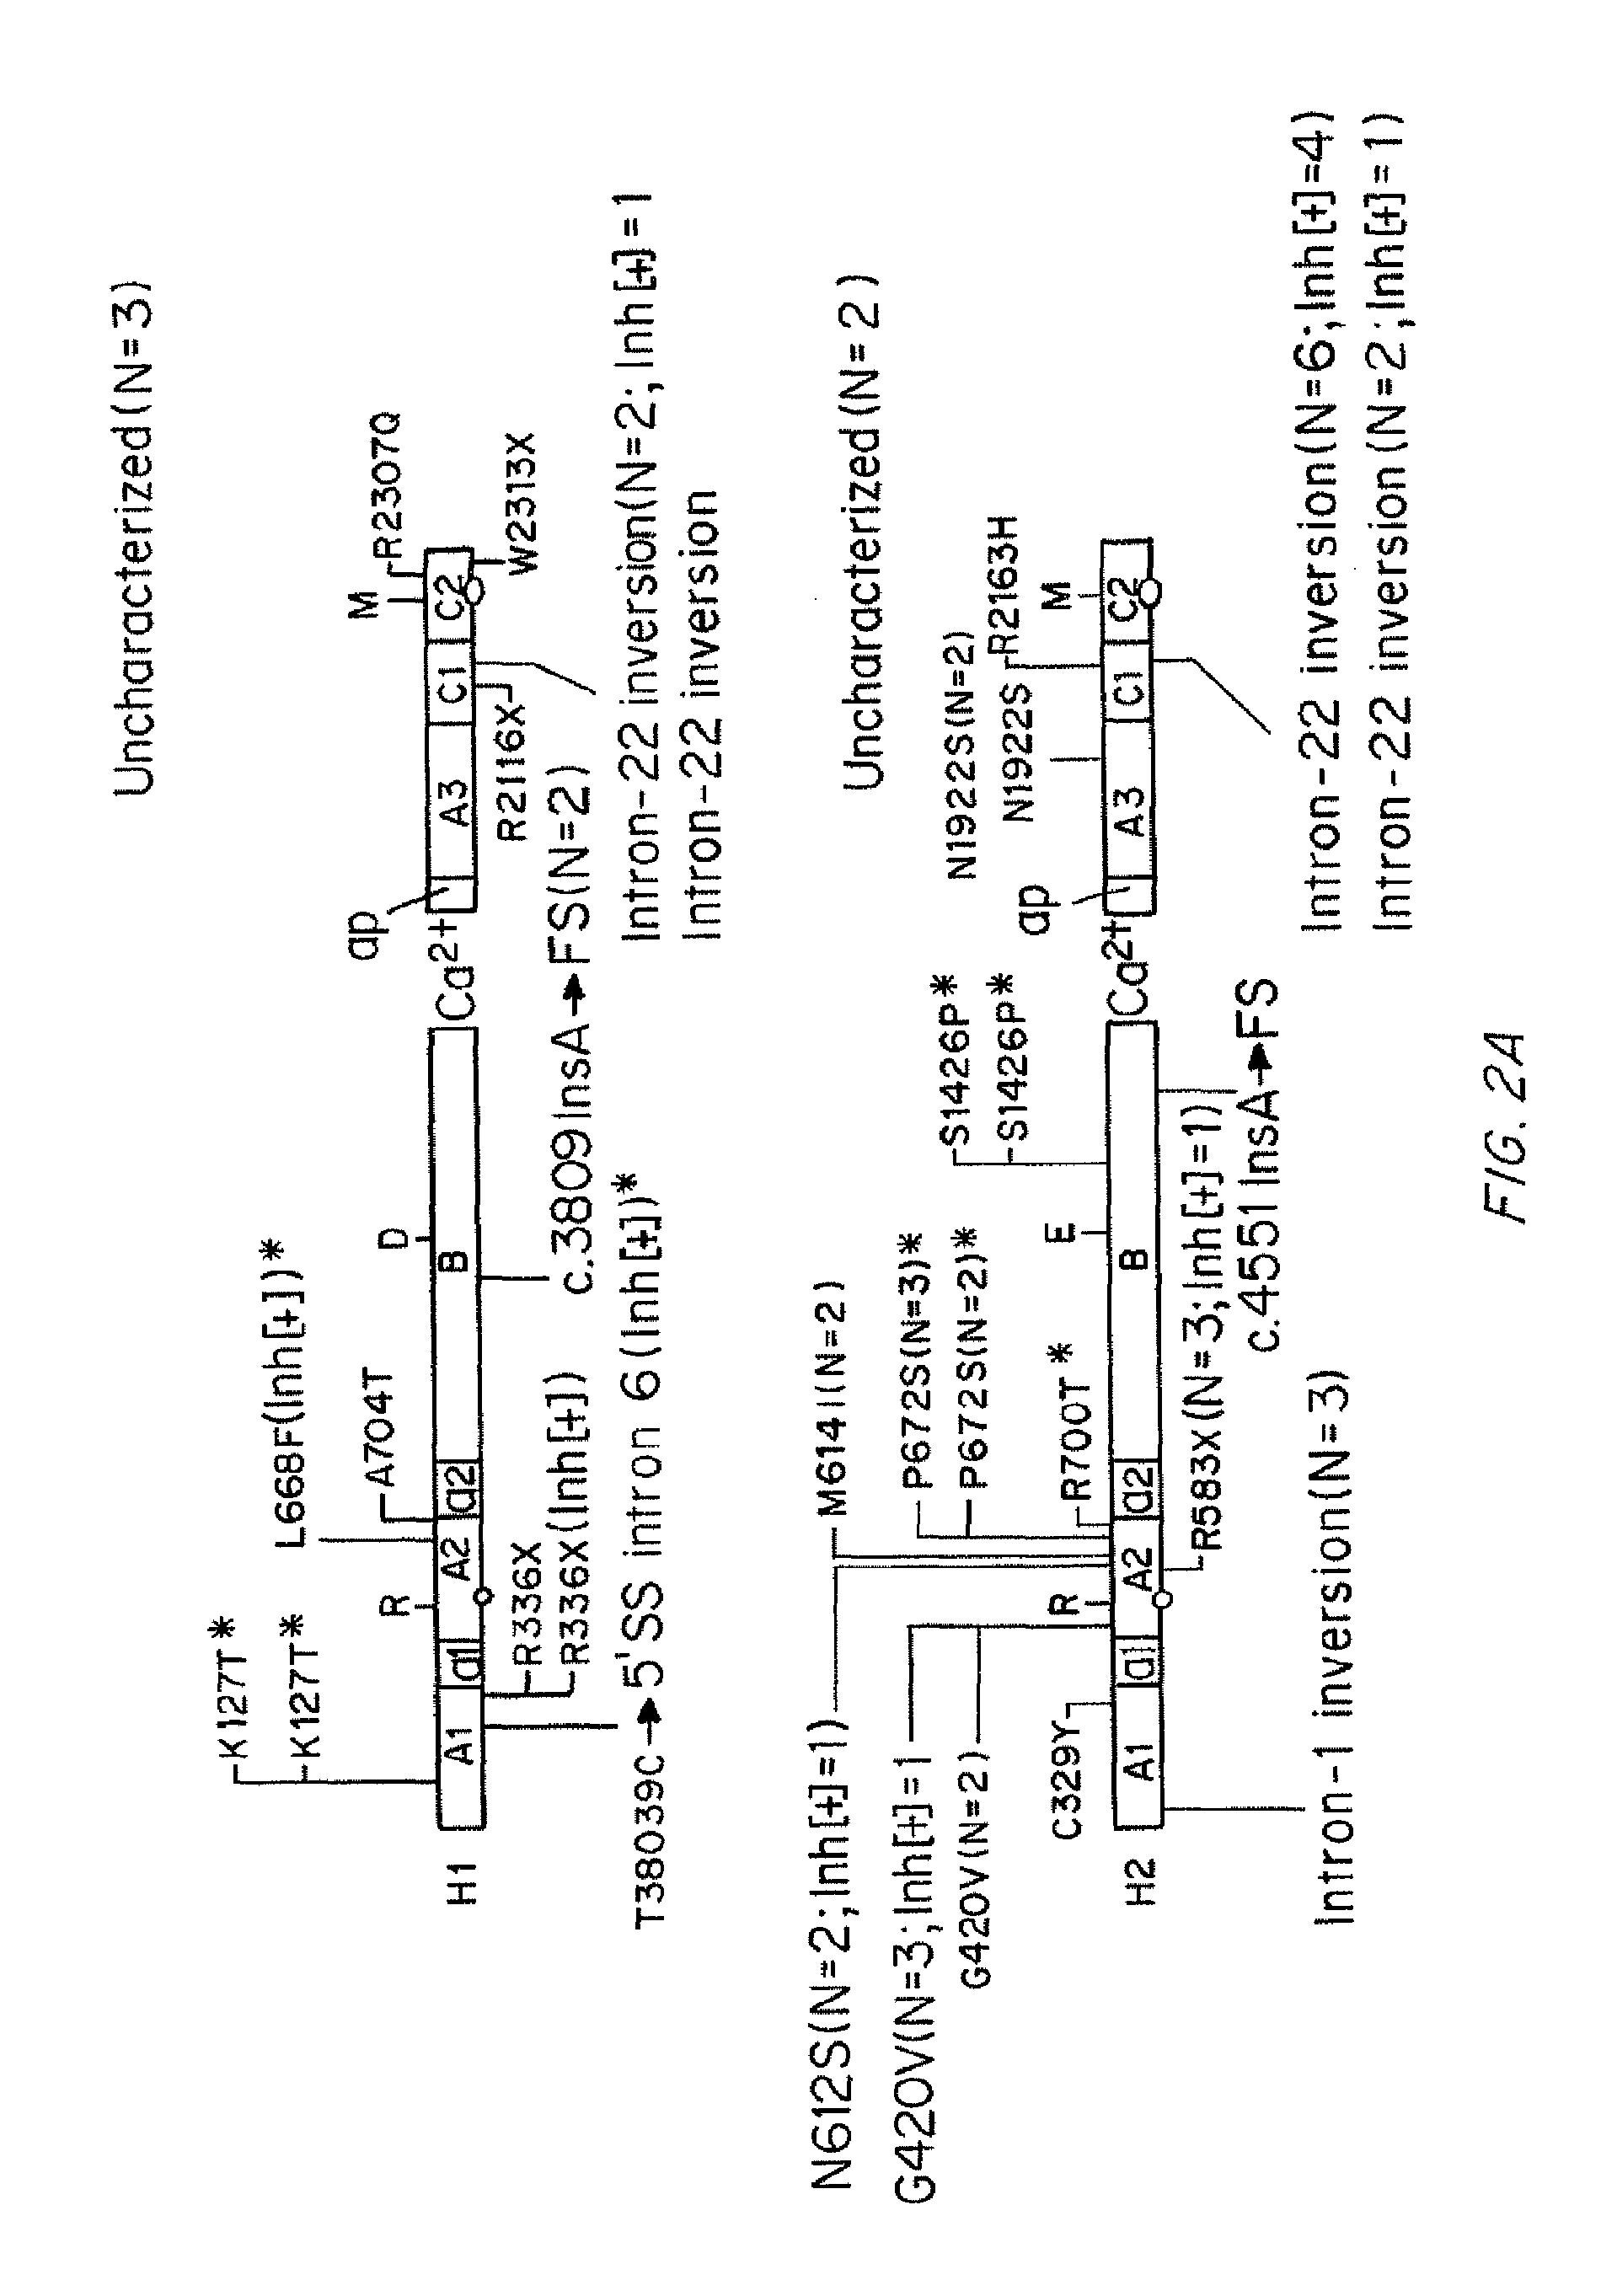 Compositions and Methods of Treatment of Black Hemophiliac Patients